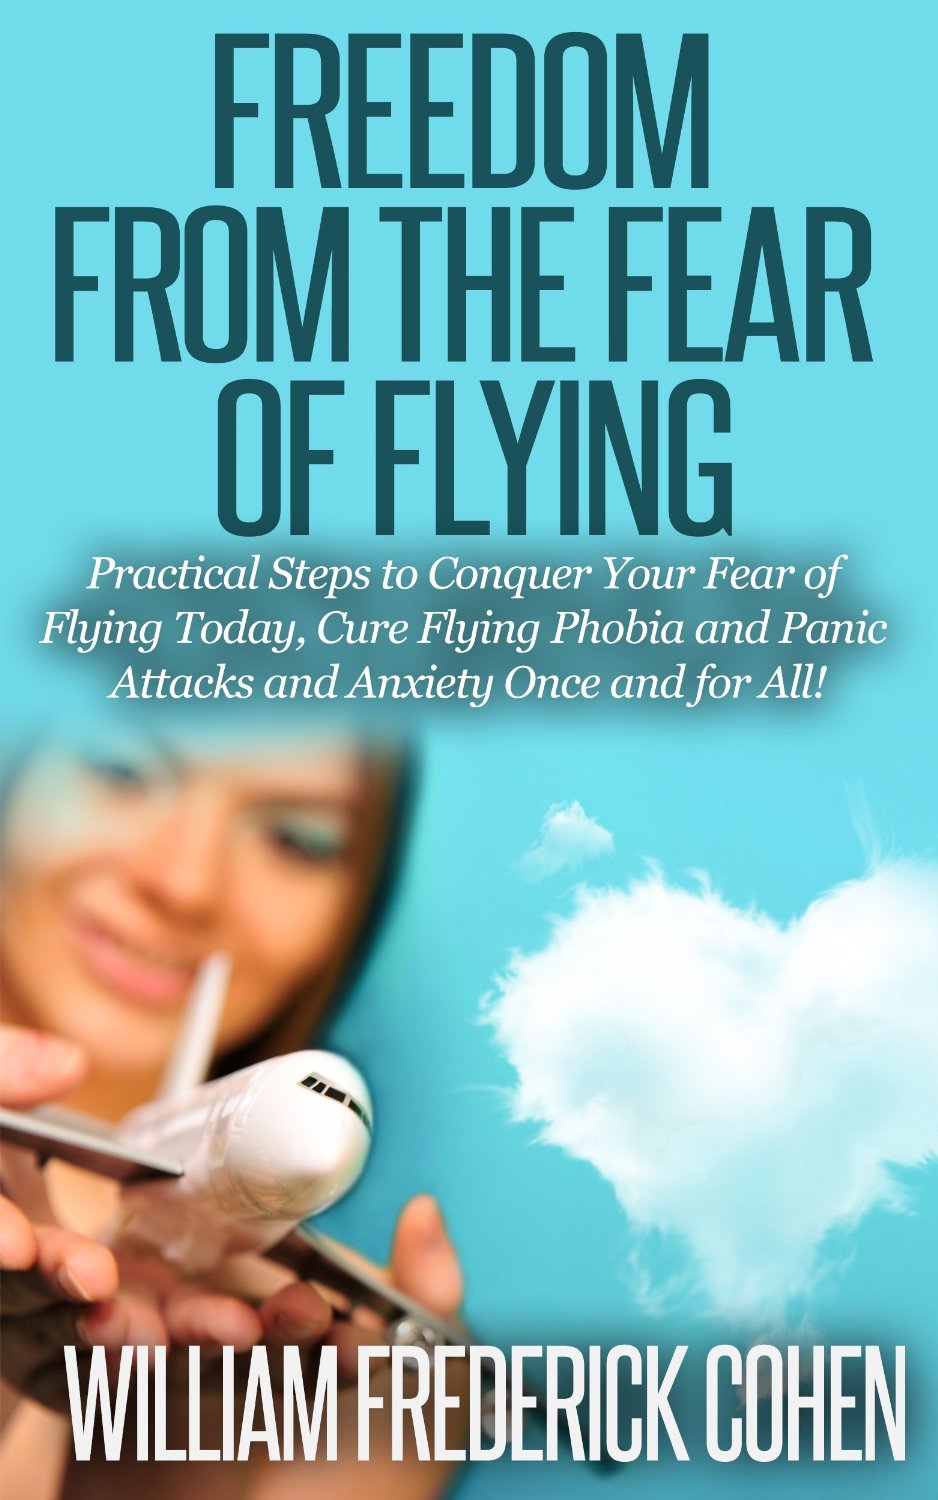 Freedom from the Fear of Flying: Practical Steps to Conquer Your Fear of Flying Today, Cure Flying Phobia and Panic Attacks and Anxiety Once and for All! by William Frederick Cohen